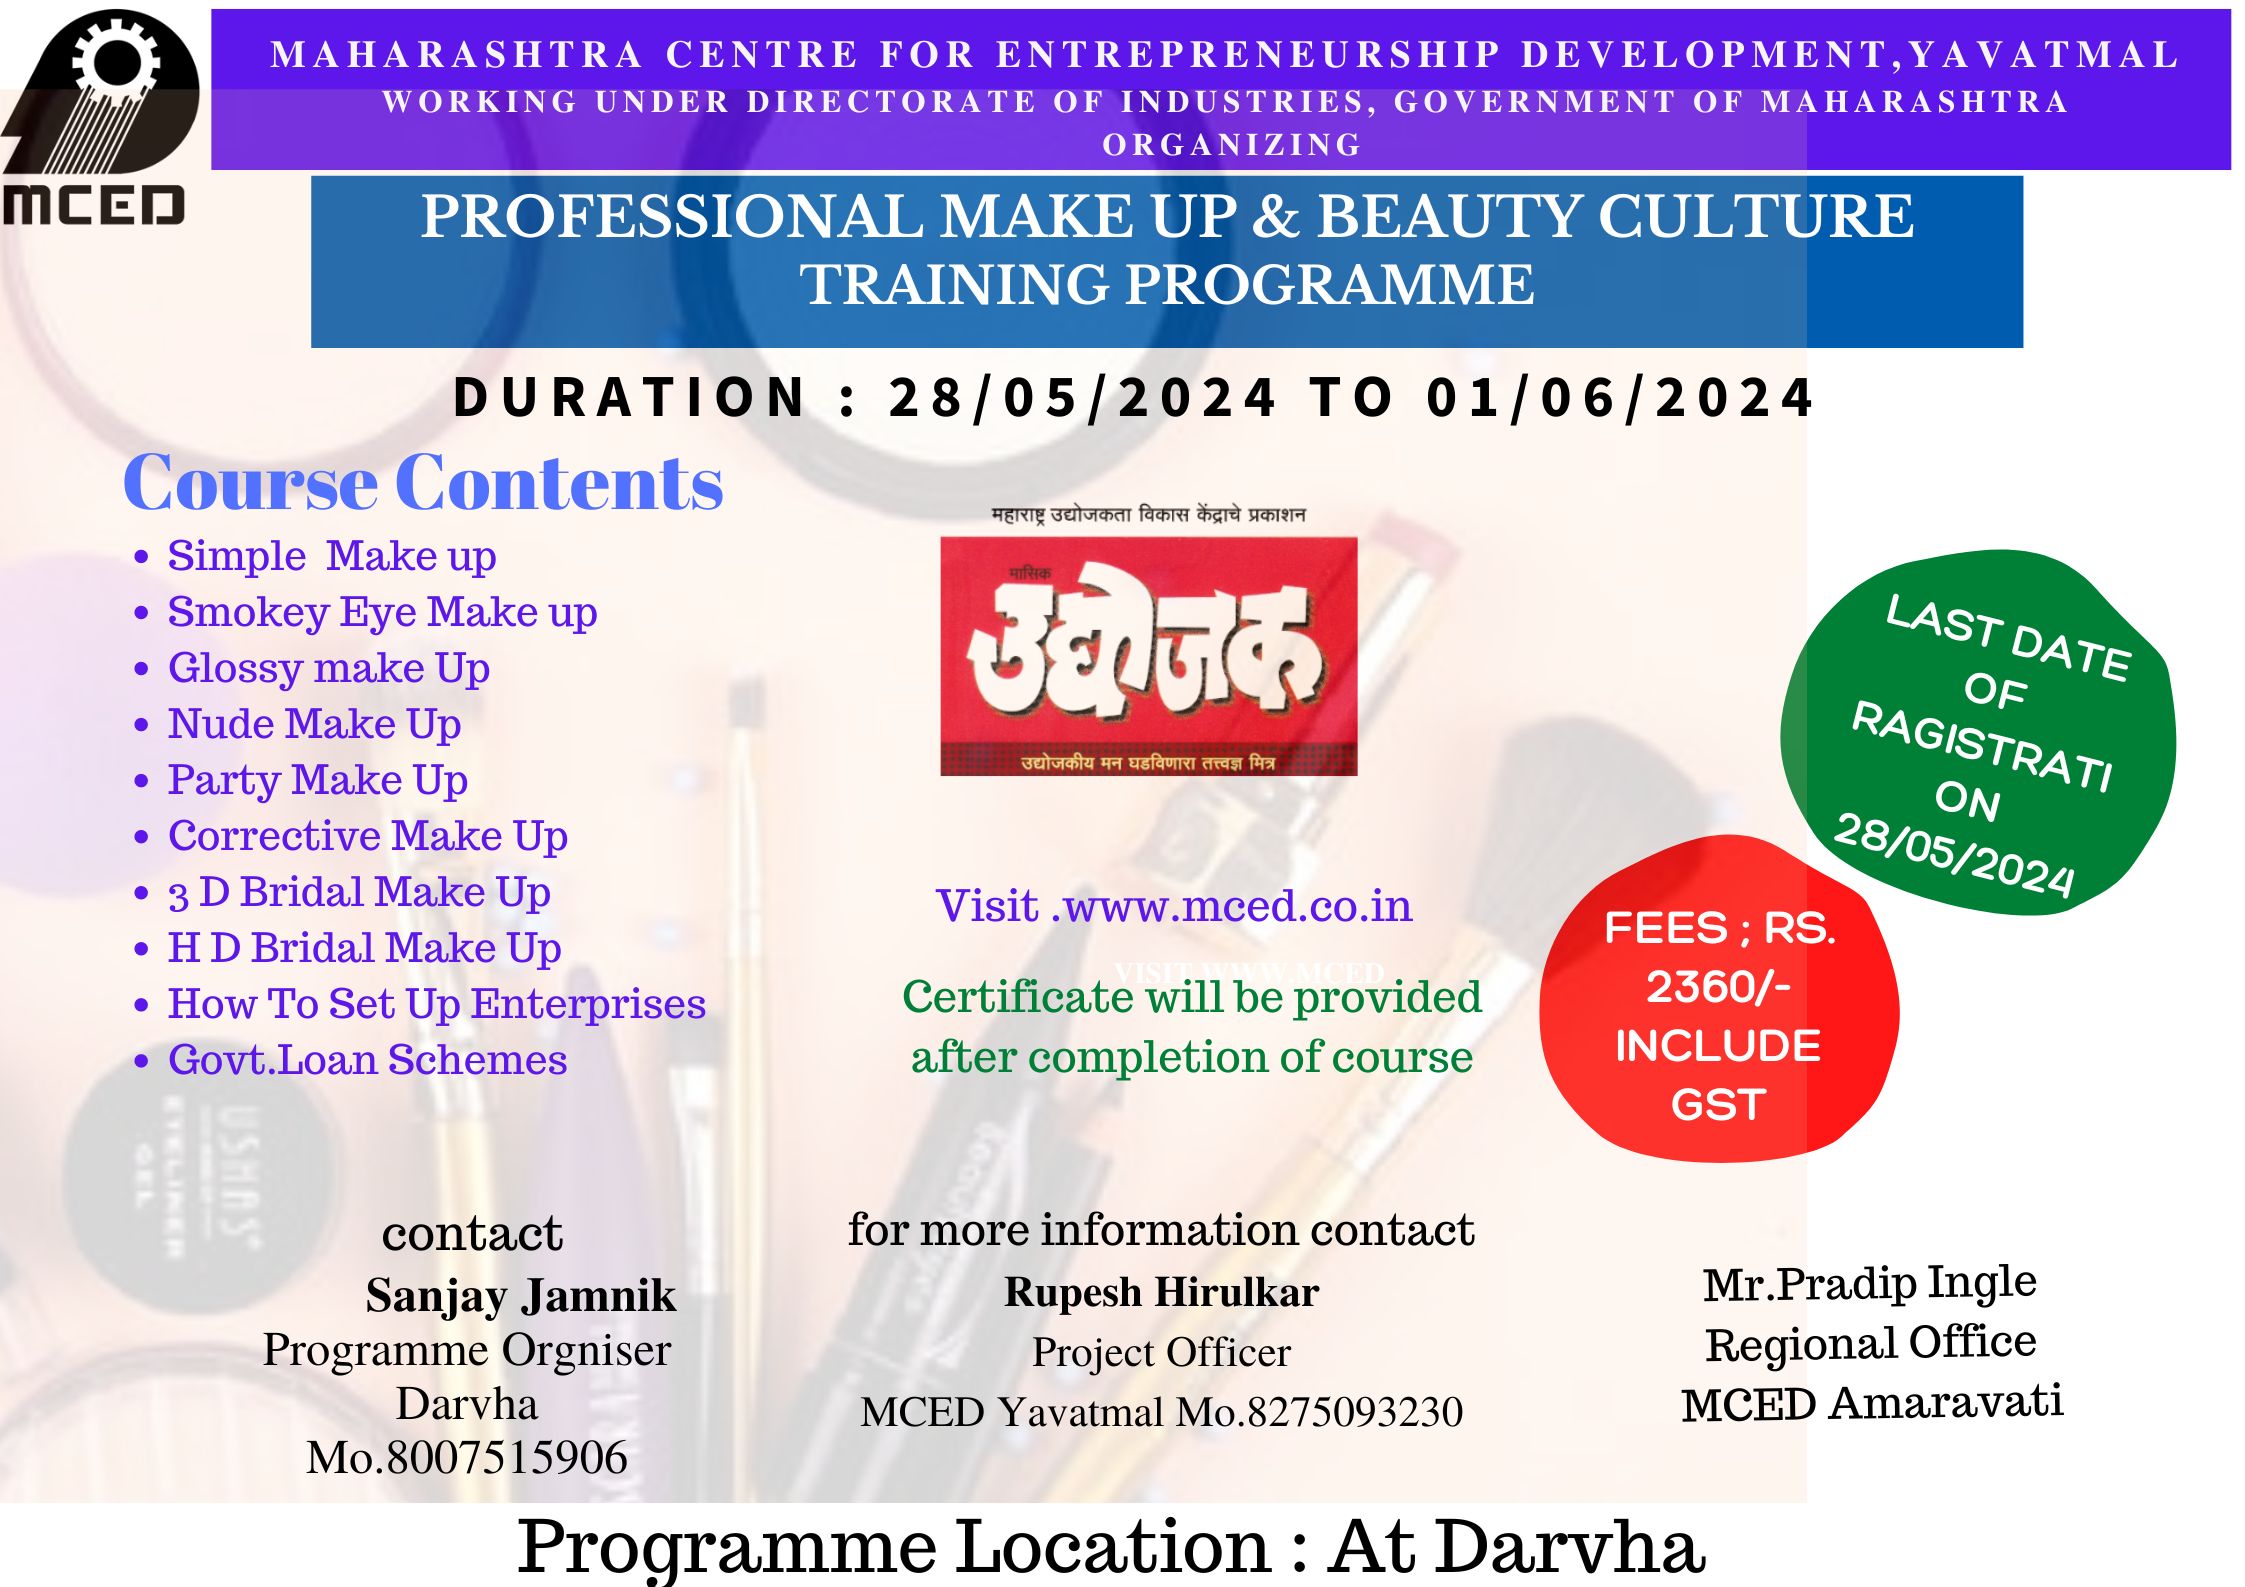 Professional Make Up and Beauty Culture Programme,Darvha